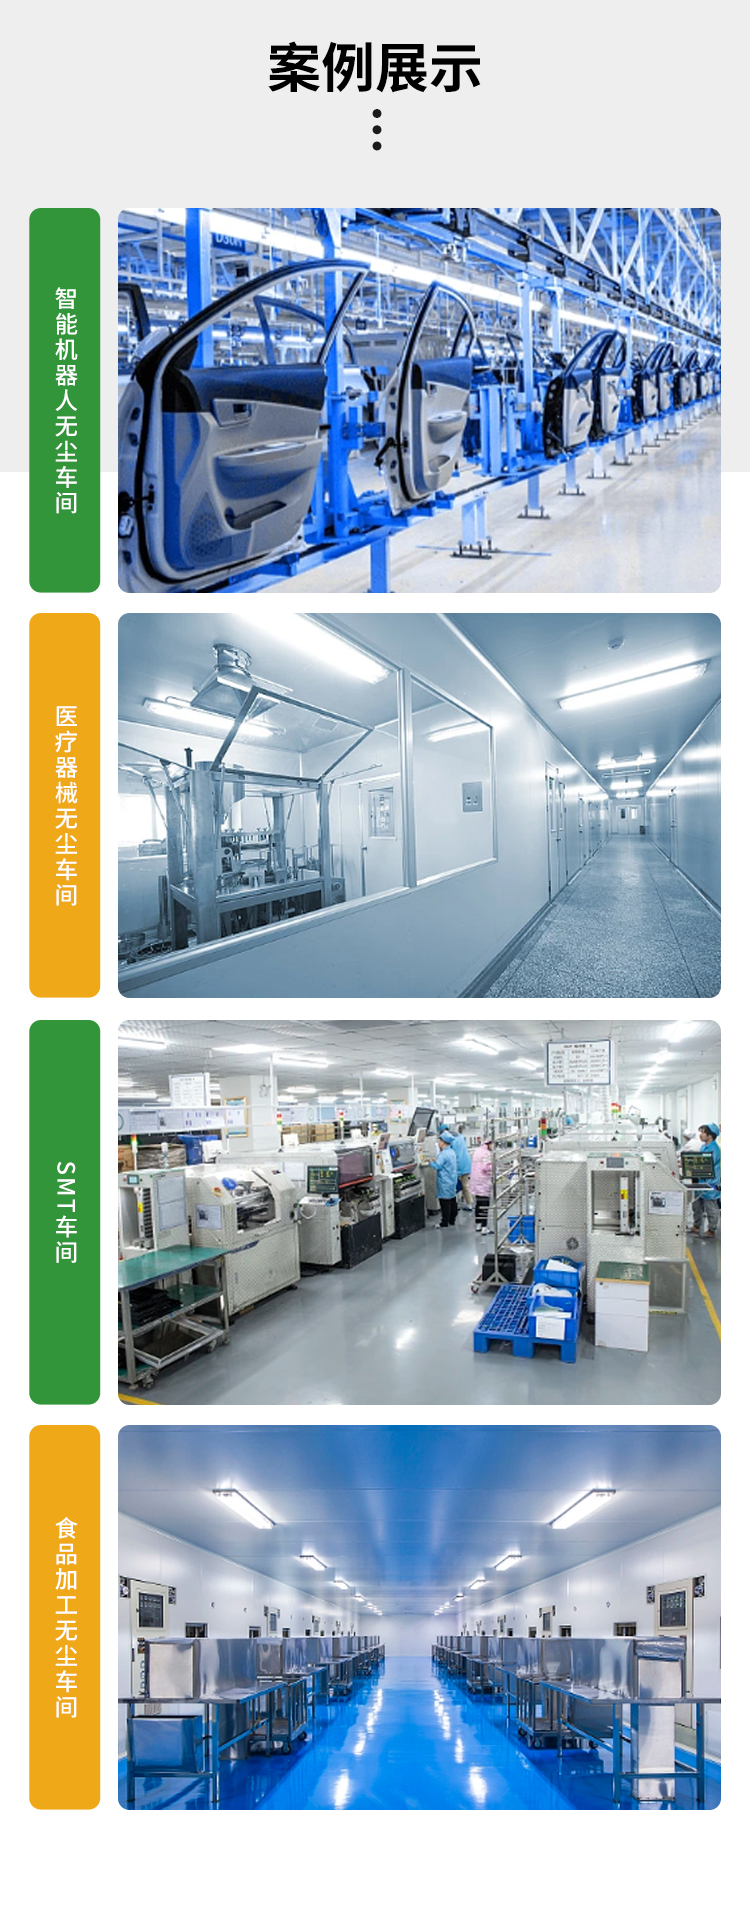 One core board industry, magnesium oxysulfide purification board, dust-free workshop, clean wall board, ceiling board, customized processing according to needs